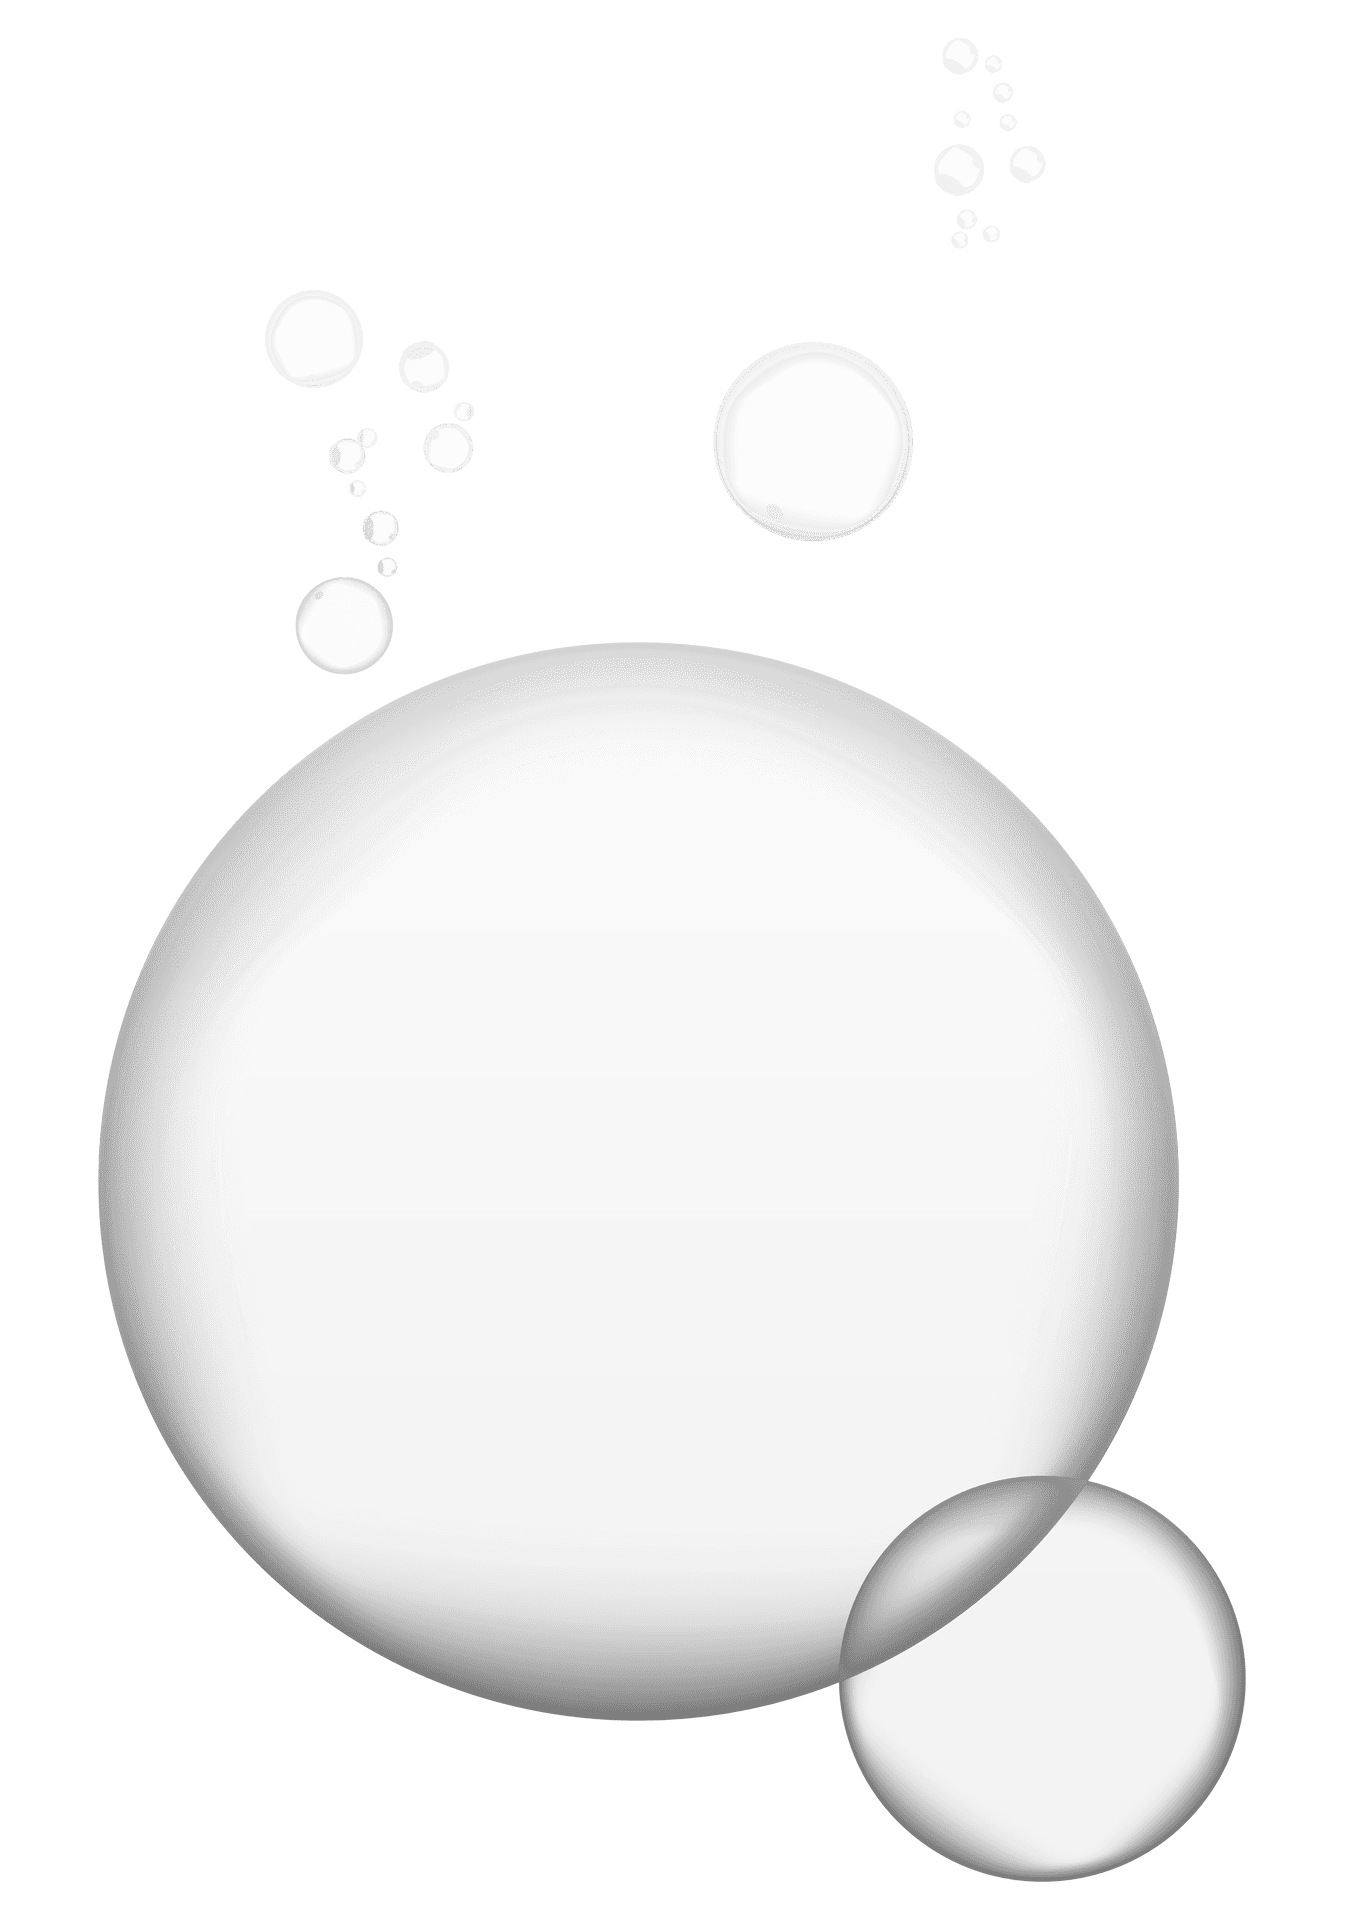 Abstract Bubbles Design PNG